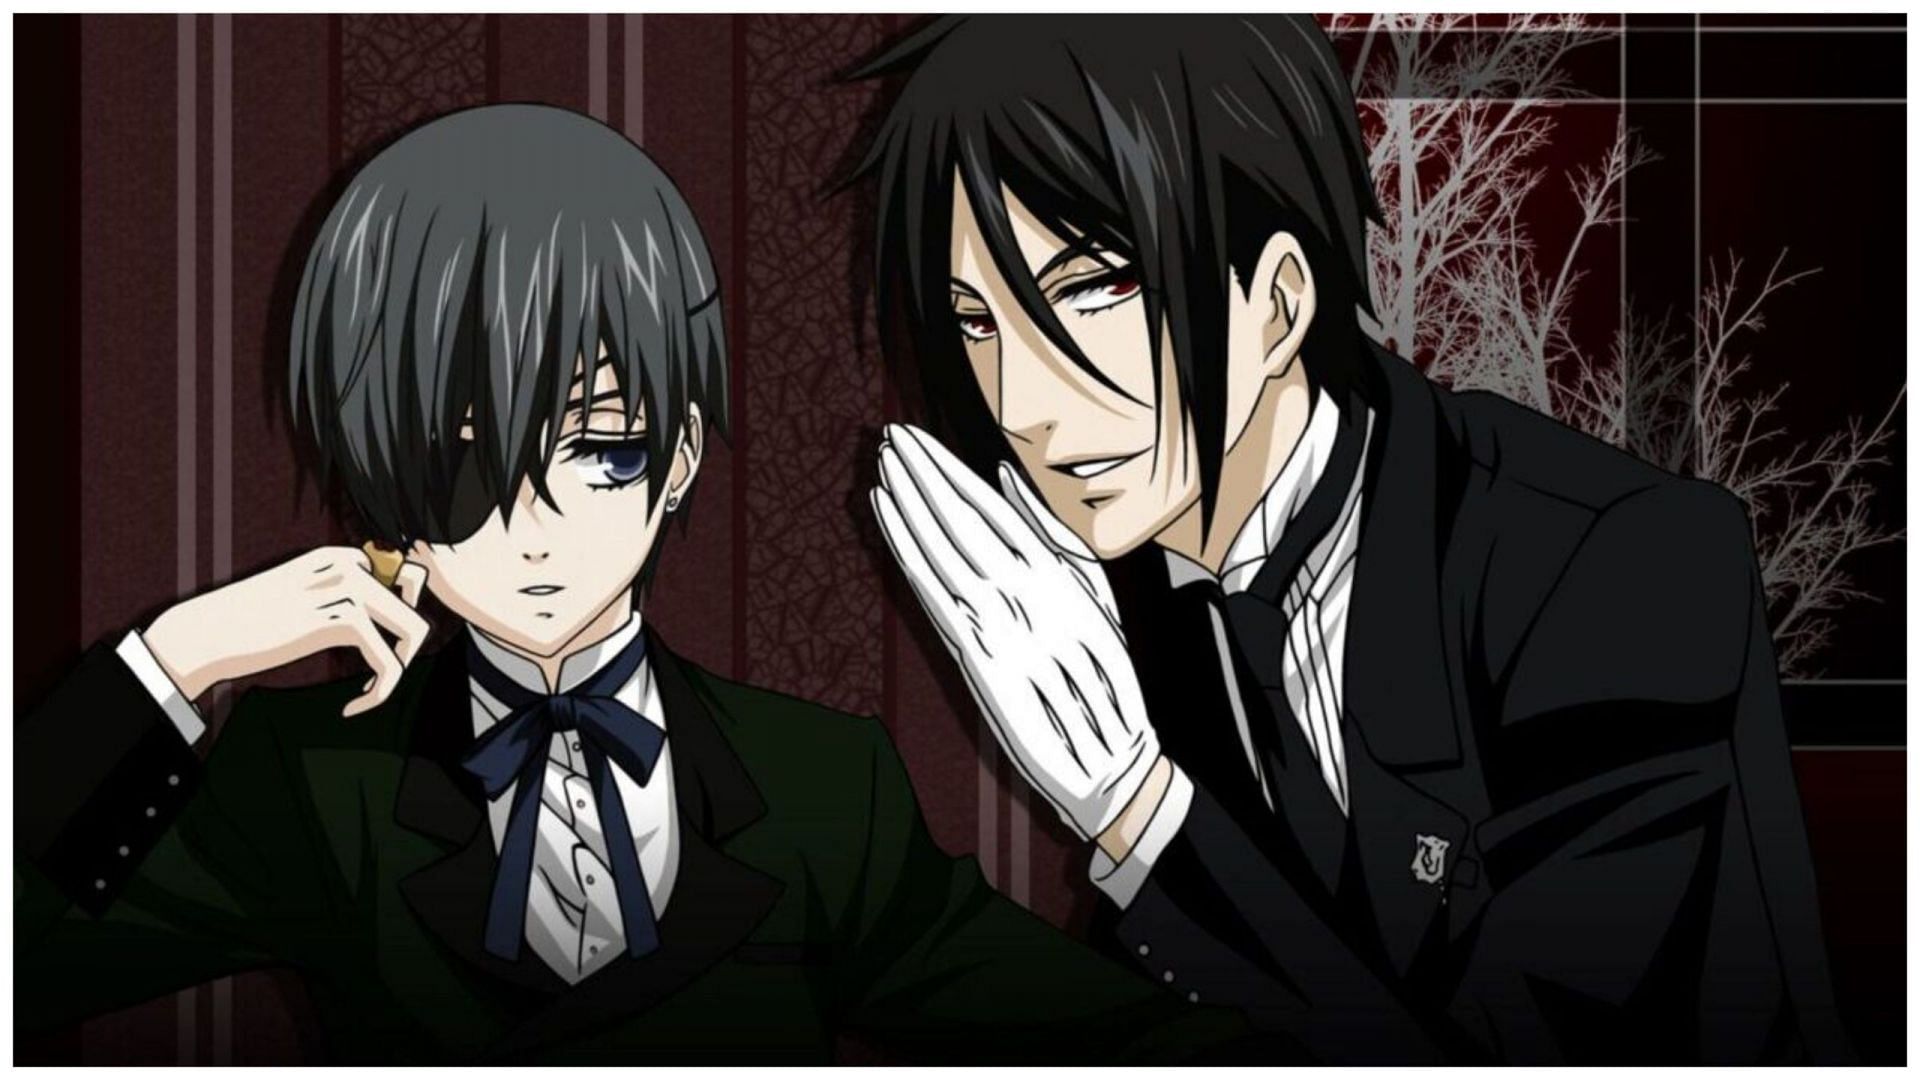 Mysteries of Weston College in Black Butler Season 4 (Image via A-1 Pictures)